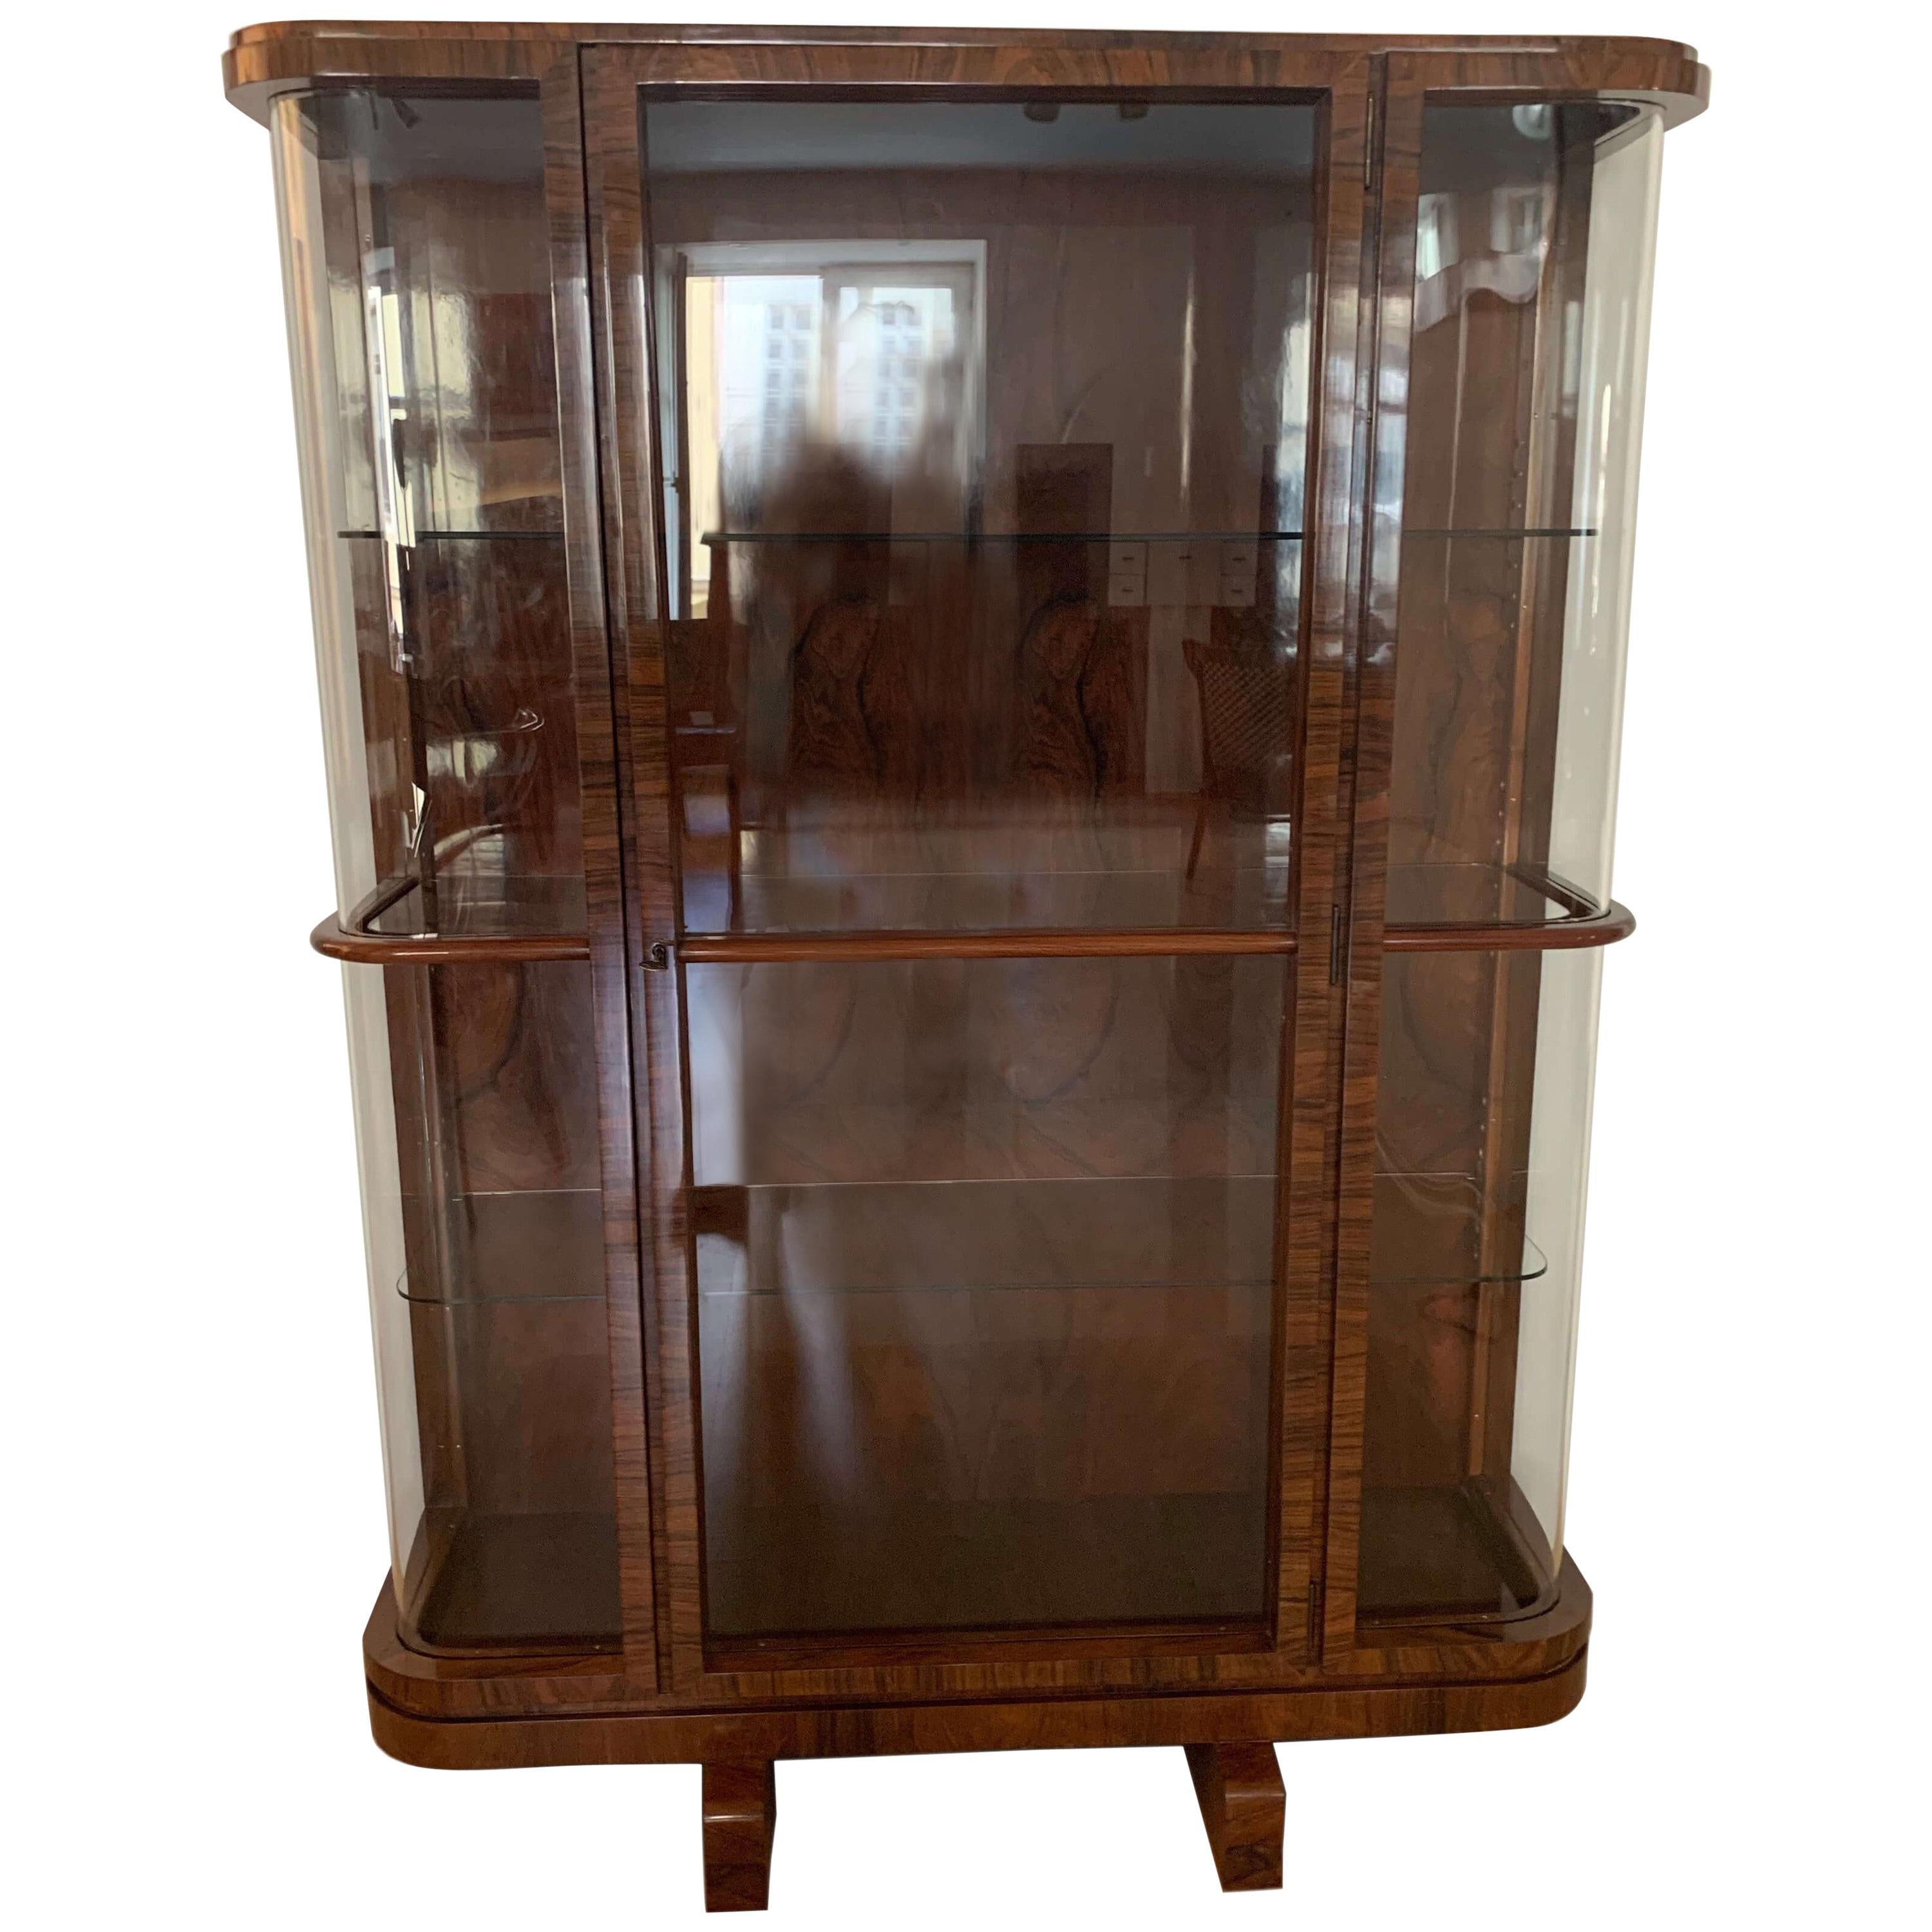 Wonderful original Art Deco vitrine or display case. 
Amazing rich rosewood / Palisander veneer, hand polished with shellac (French polish). 
Thick original curved glass windows and inlay shelves. Each of the three shelves can be adjusted in 7